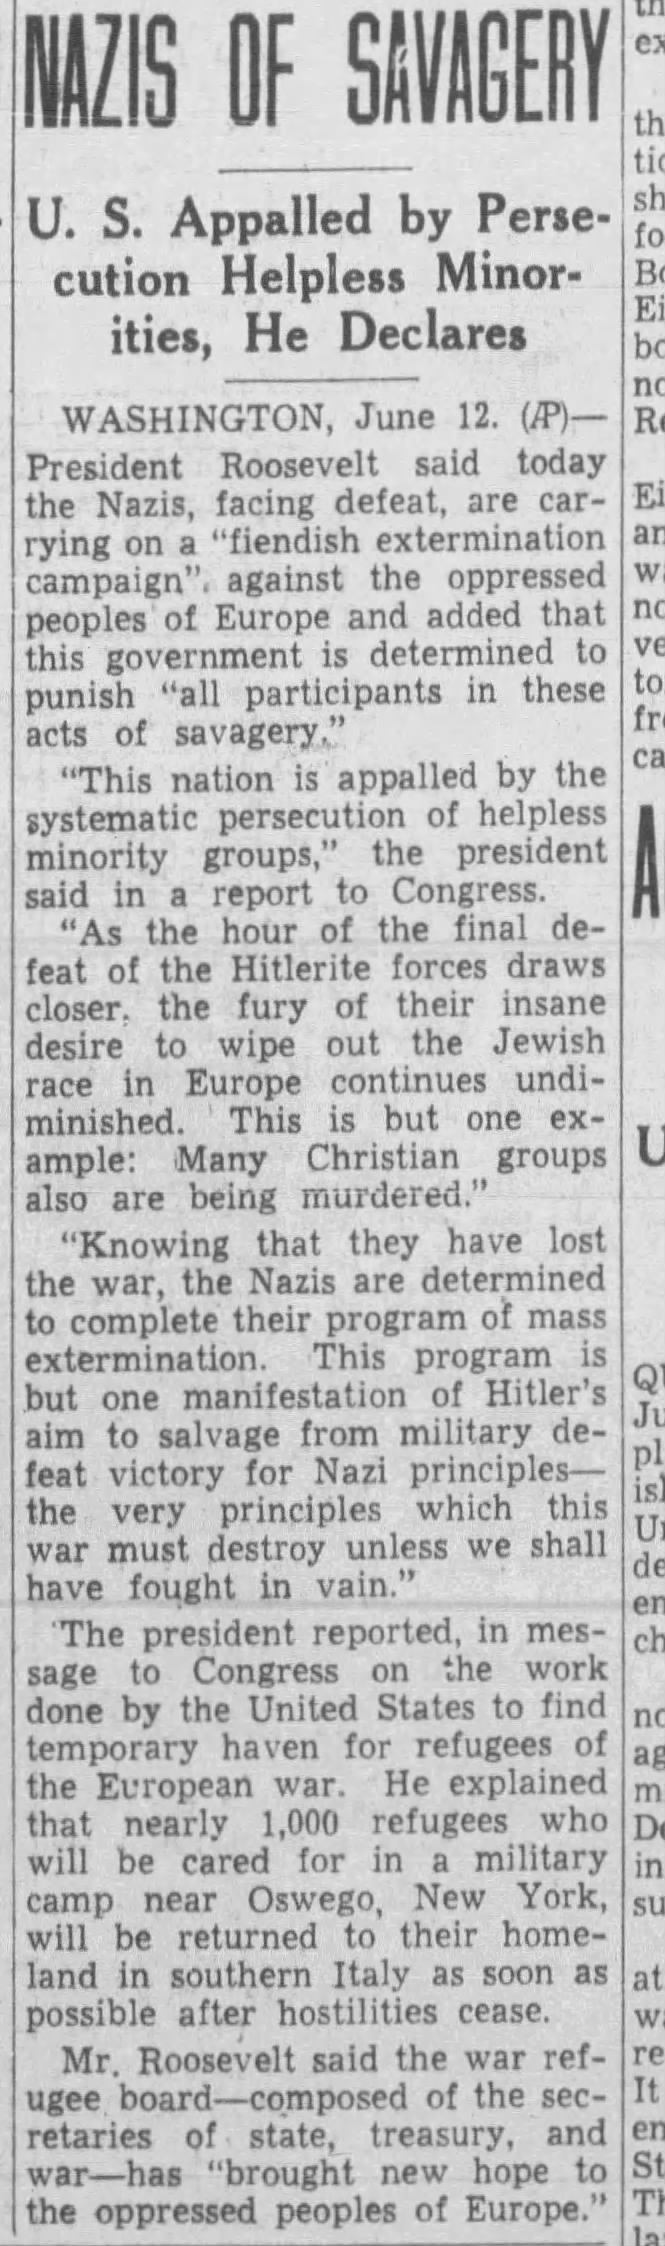 Roosevelt Accuses Nazis of Savagery